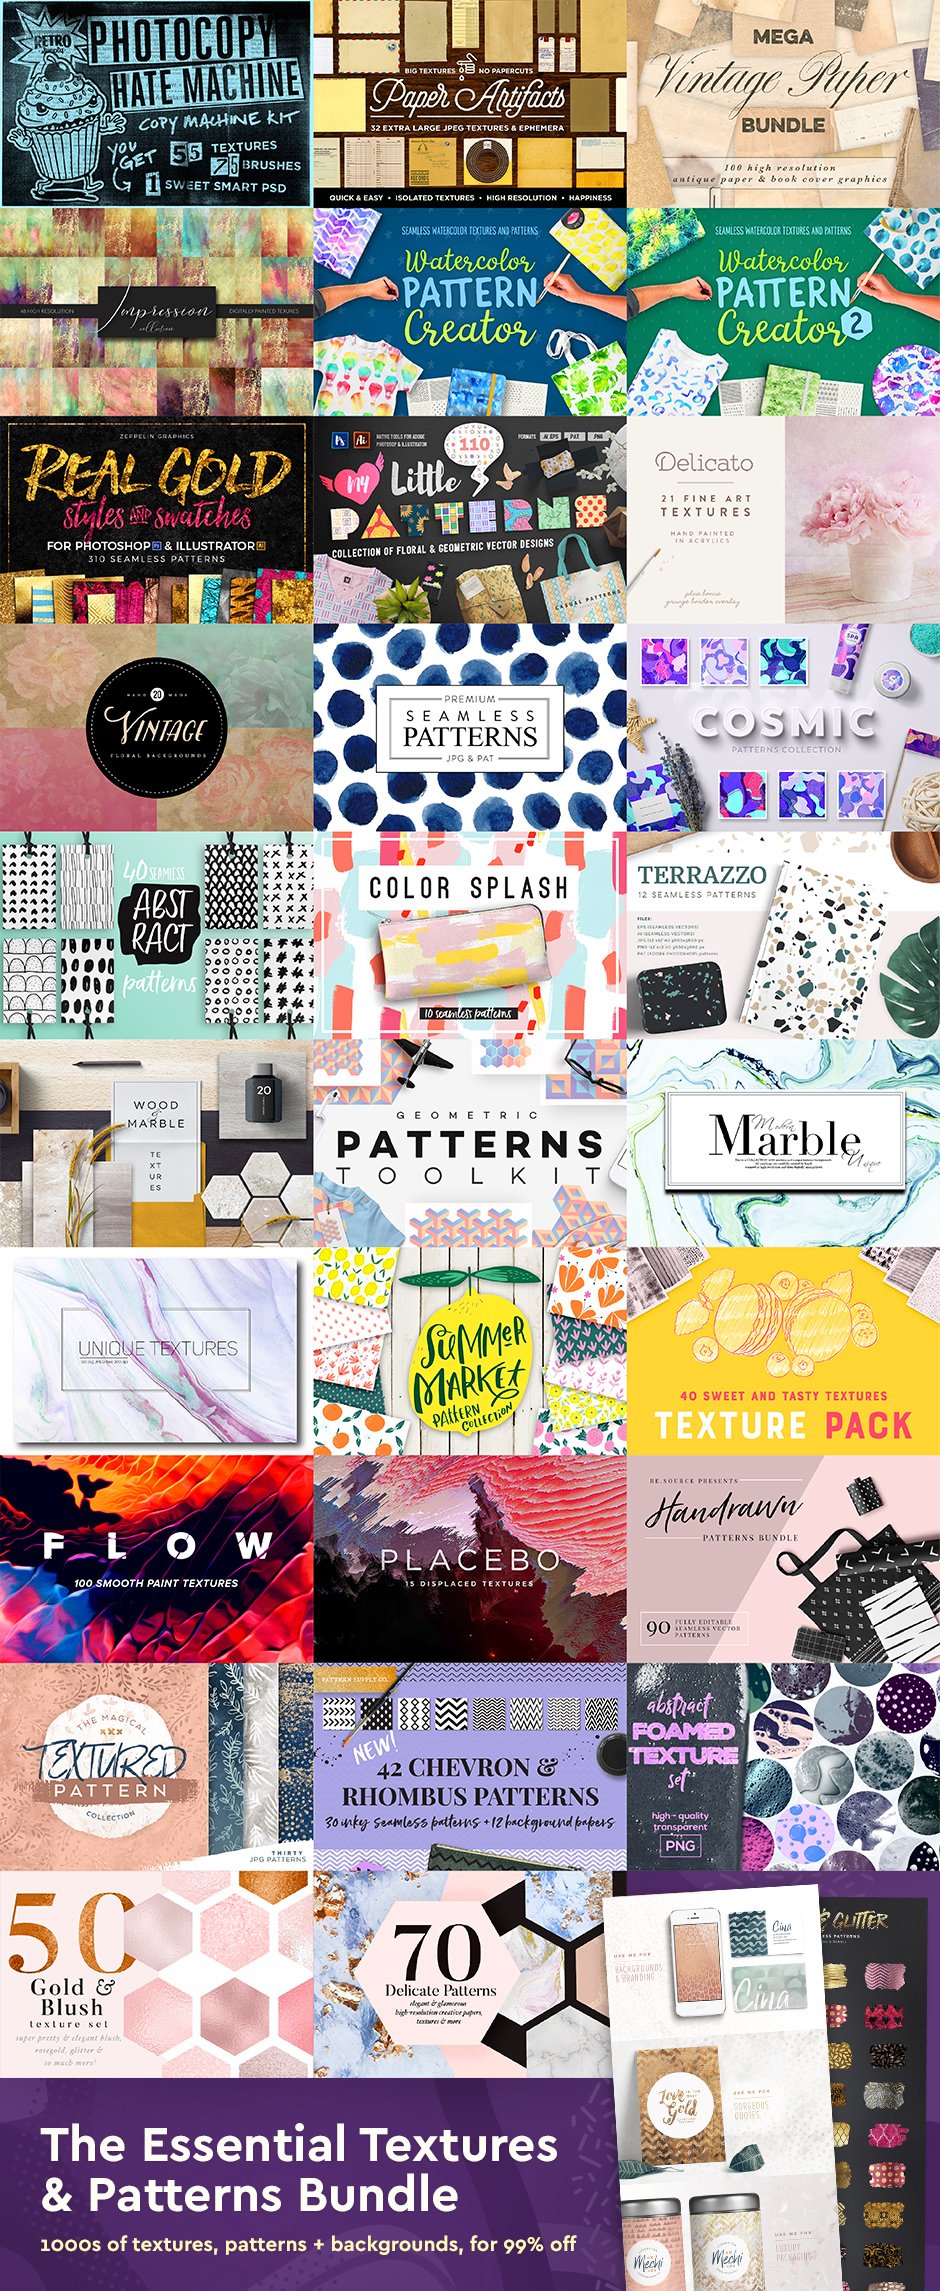 The Essential Textures and Patterns Bundle Just $29